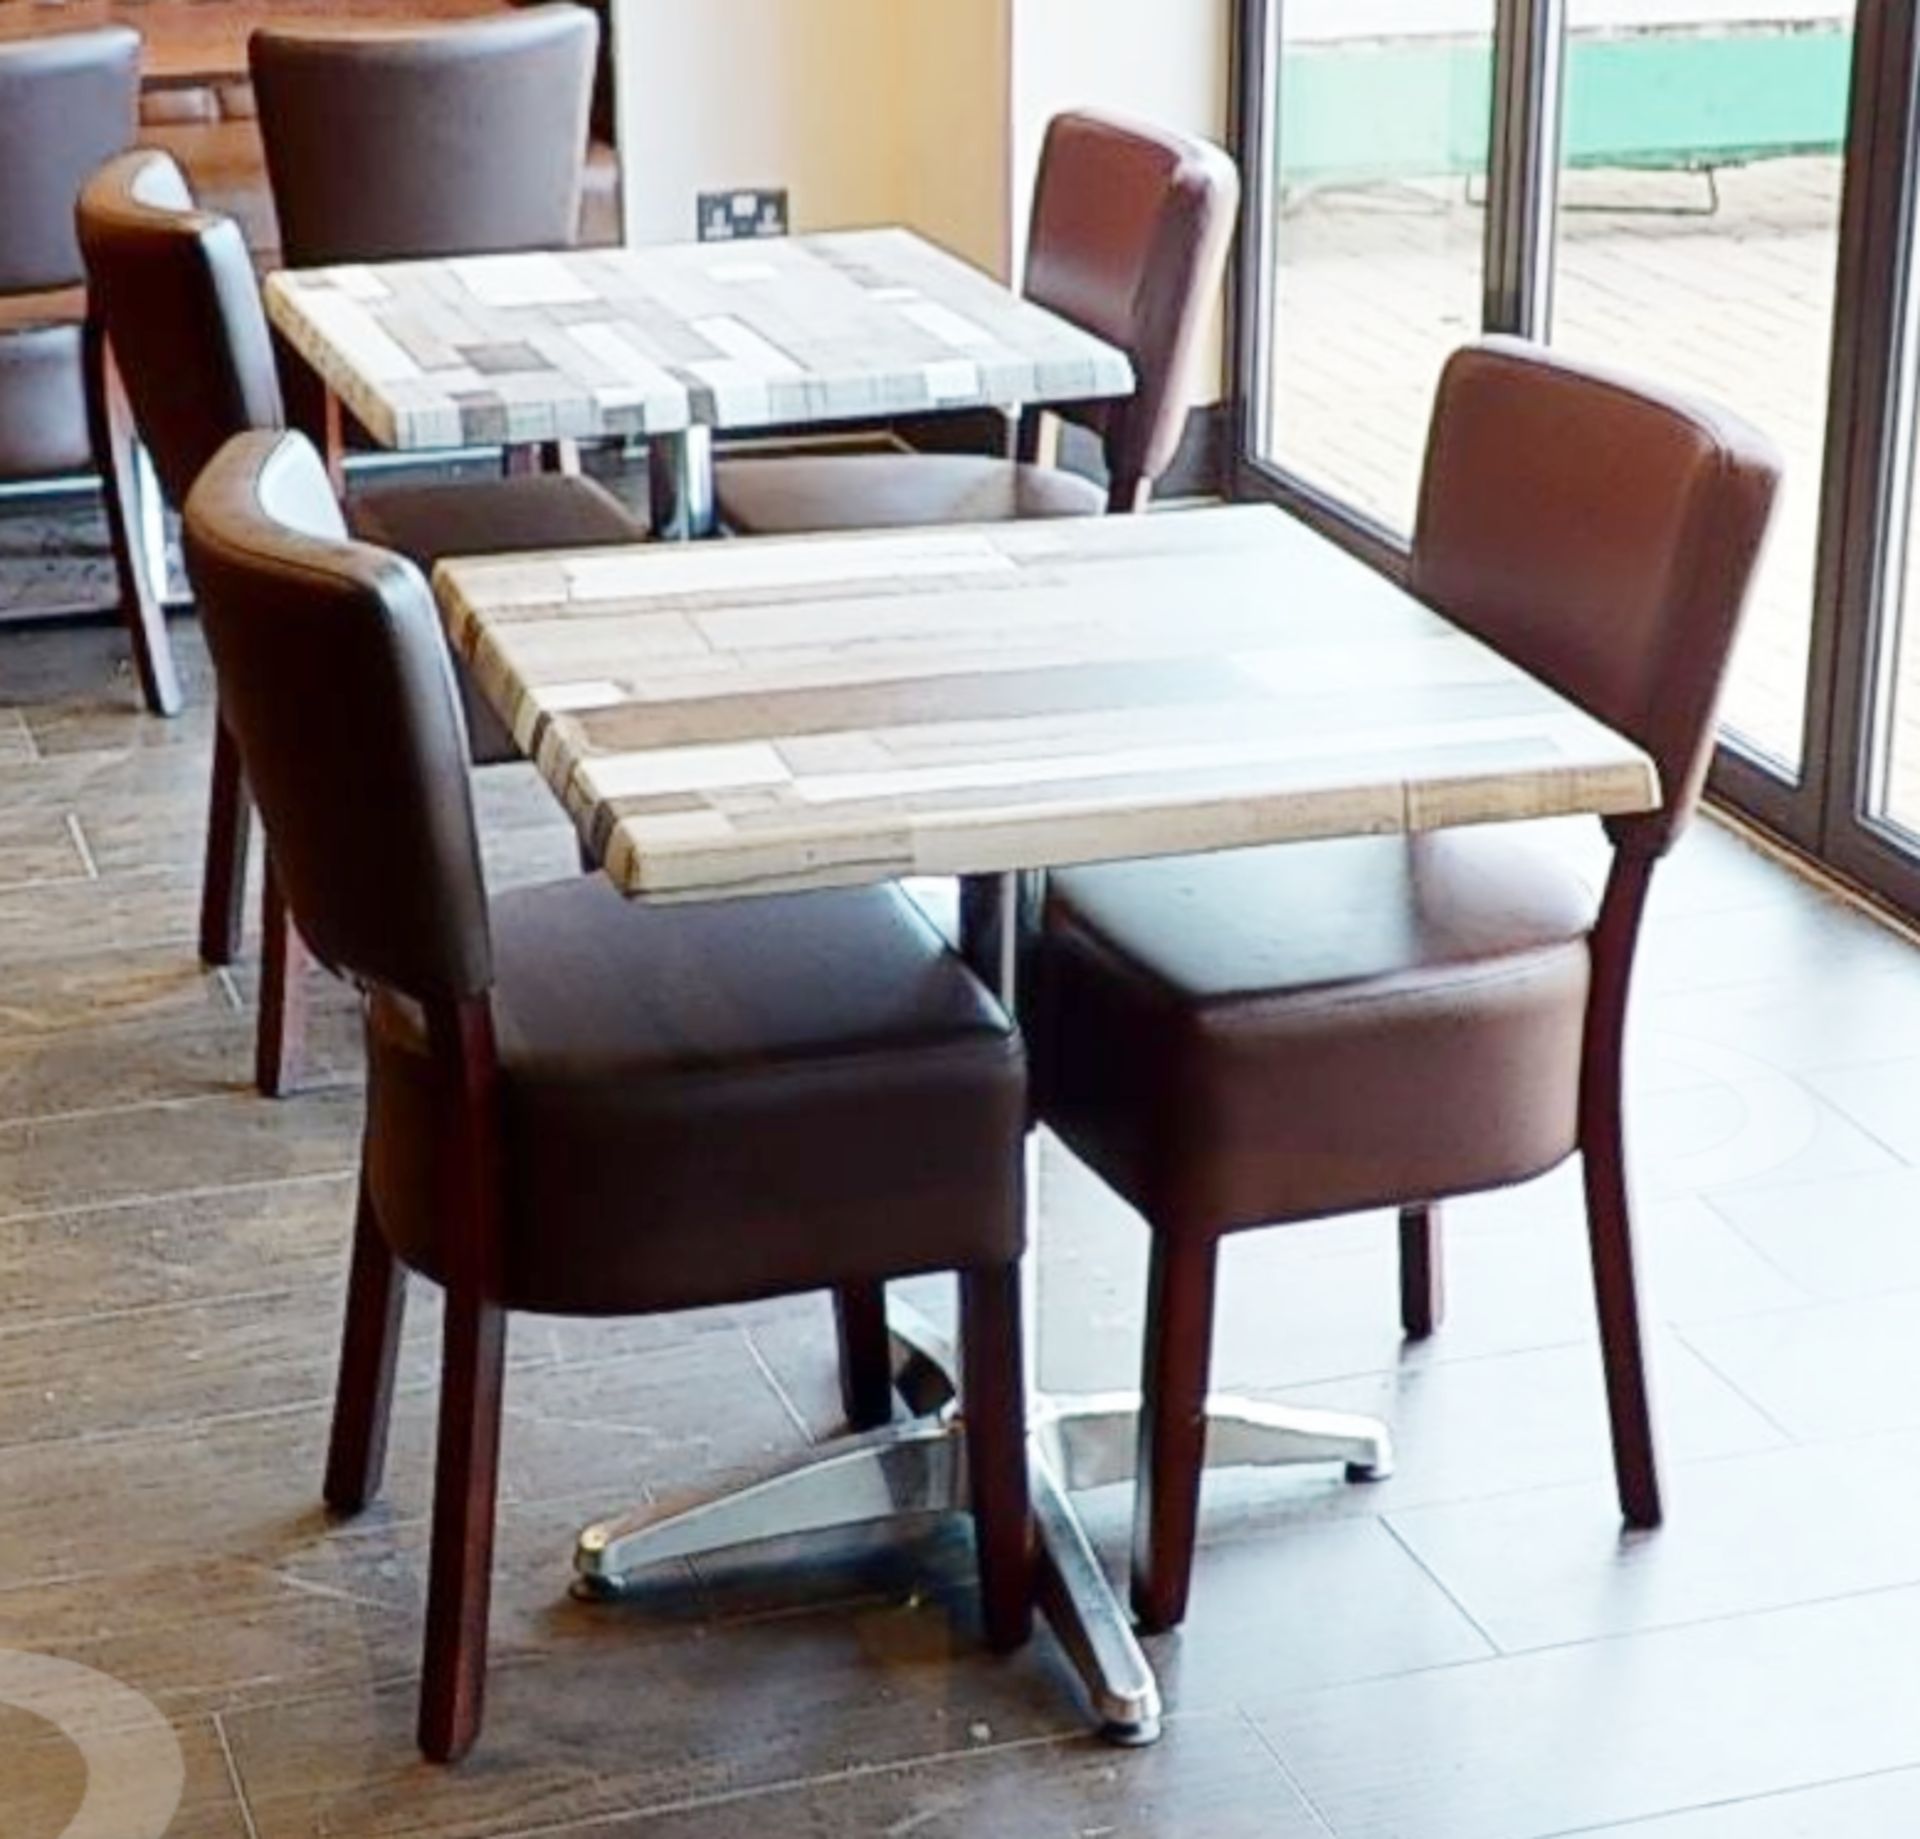 10 x Two Seater Restaurant Tables With Wood Panel Effect Tops and Chromes Bases - CL701 - - Image 7 of 9